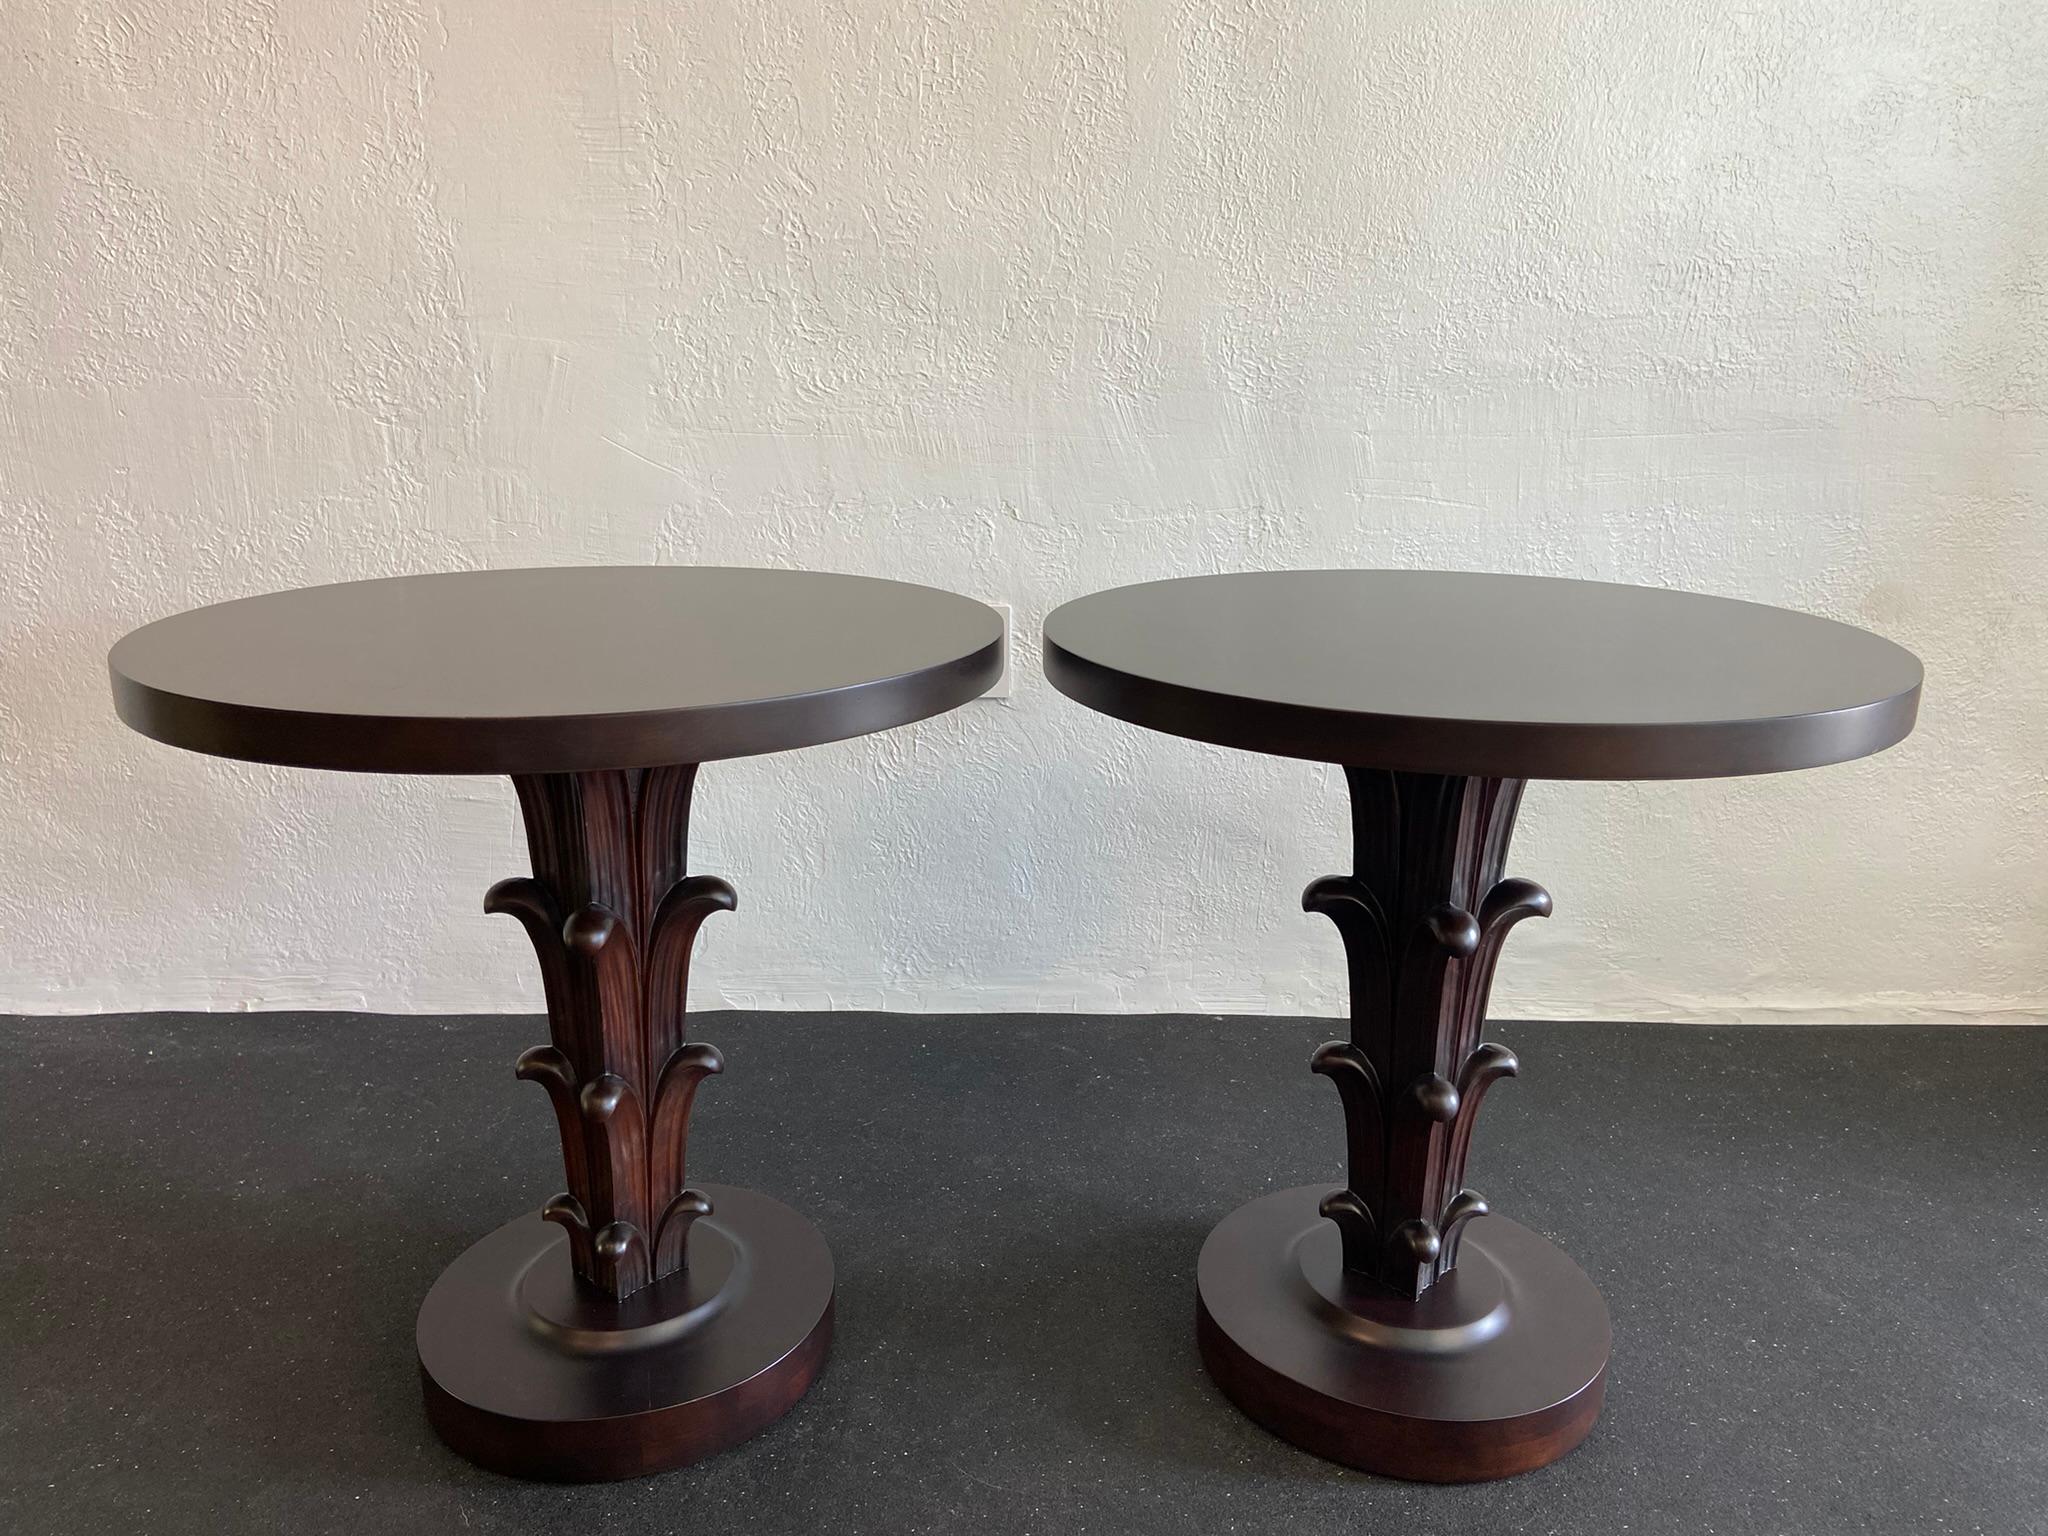 Rare pair of carved tables by T.H Robsjohn Gibbings For Widdicomb. John Stuart distribution labels intact and found on both tables. Refinished in the original dark mahogany finish. Exquisite early example of Gibbings work. 

Would work well in a